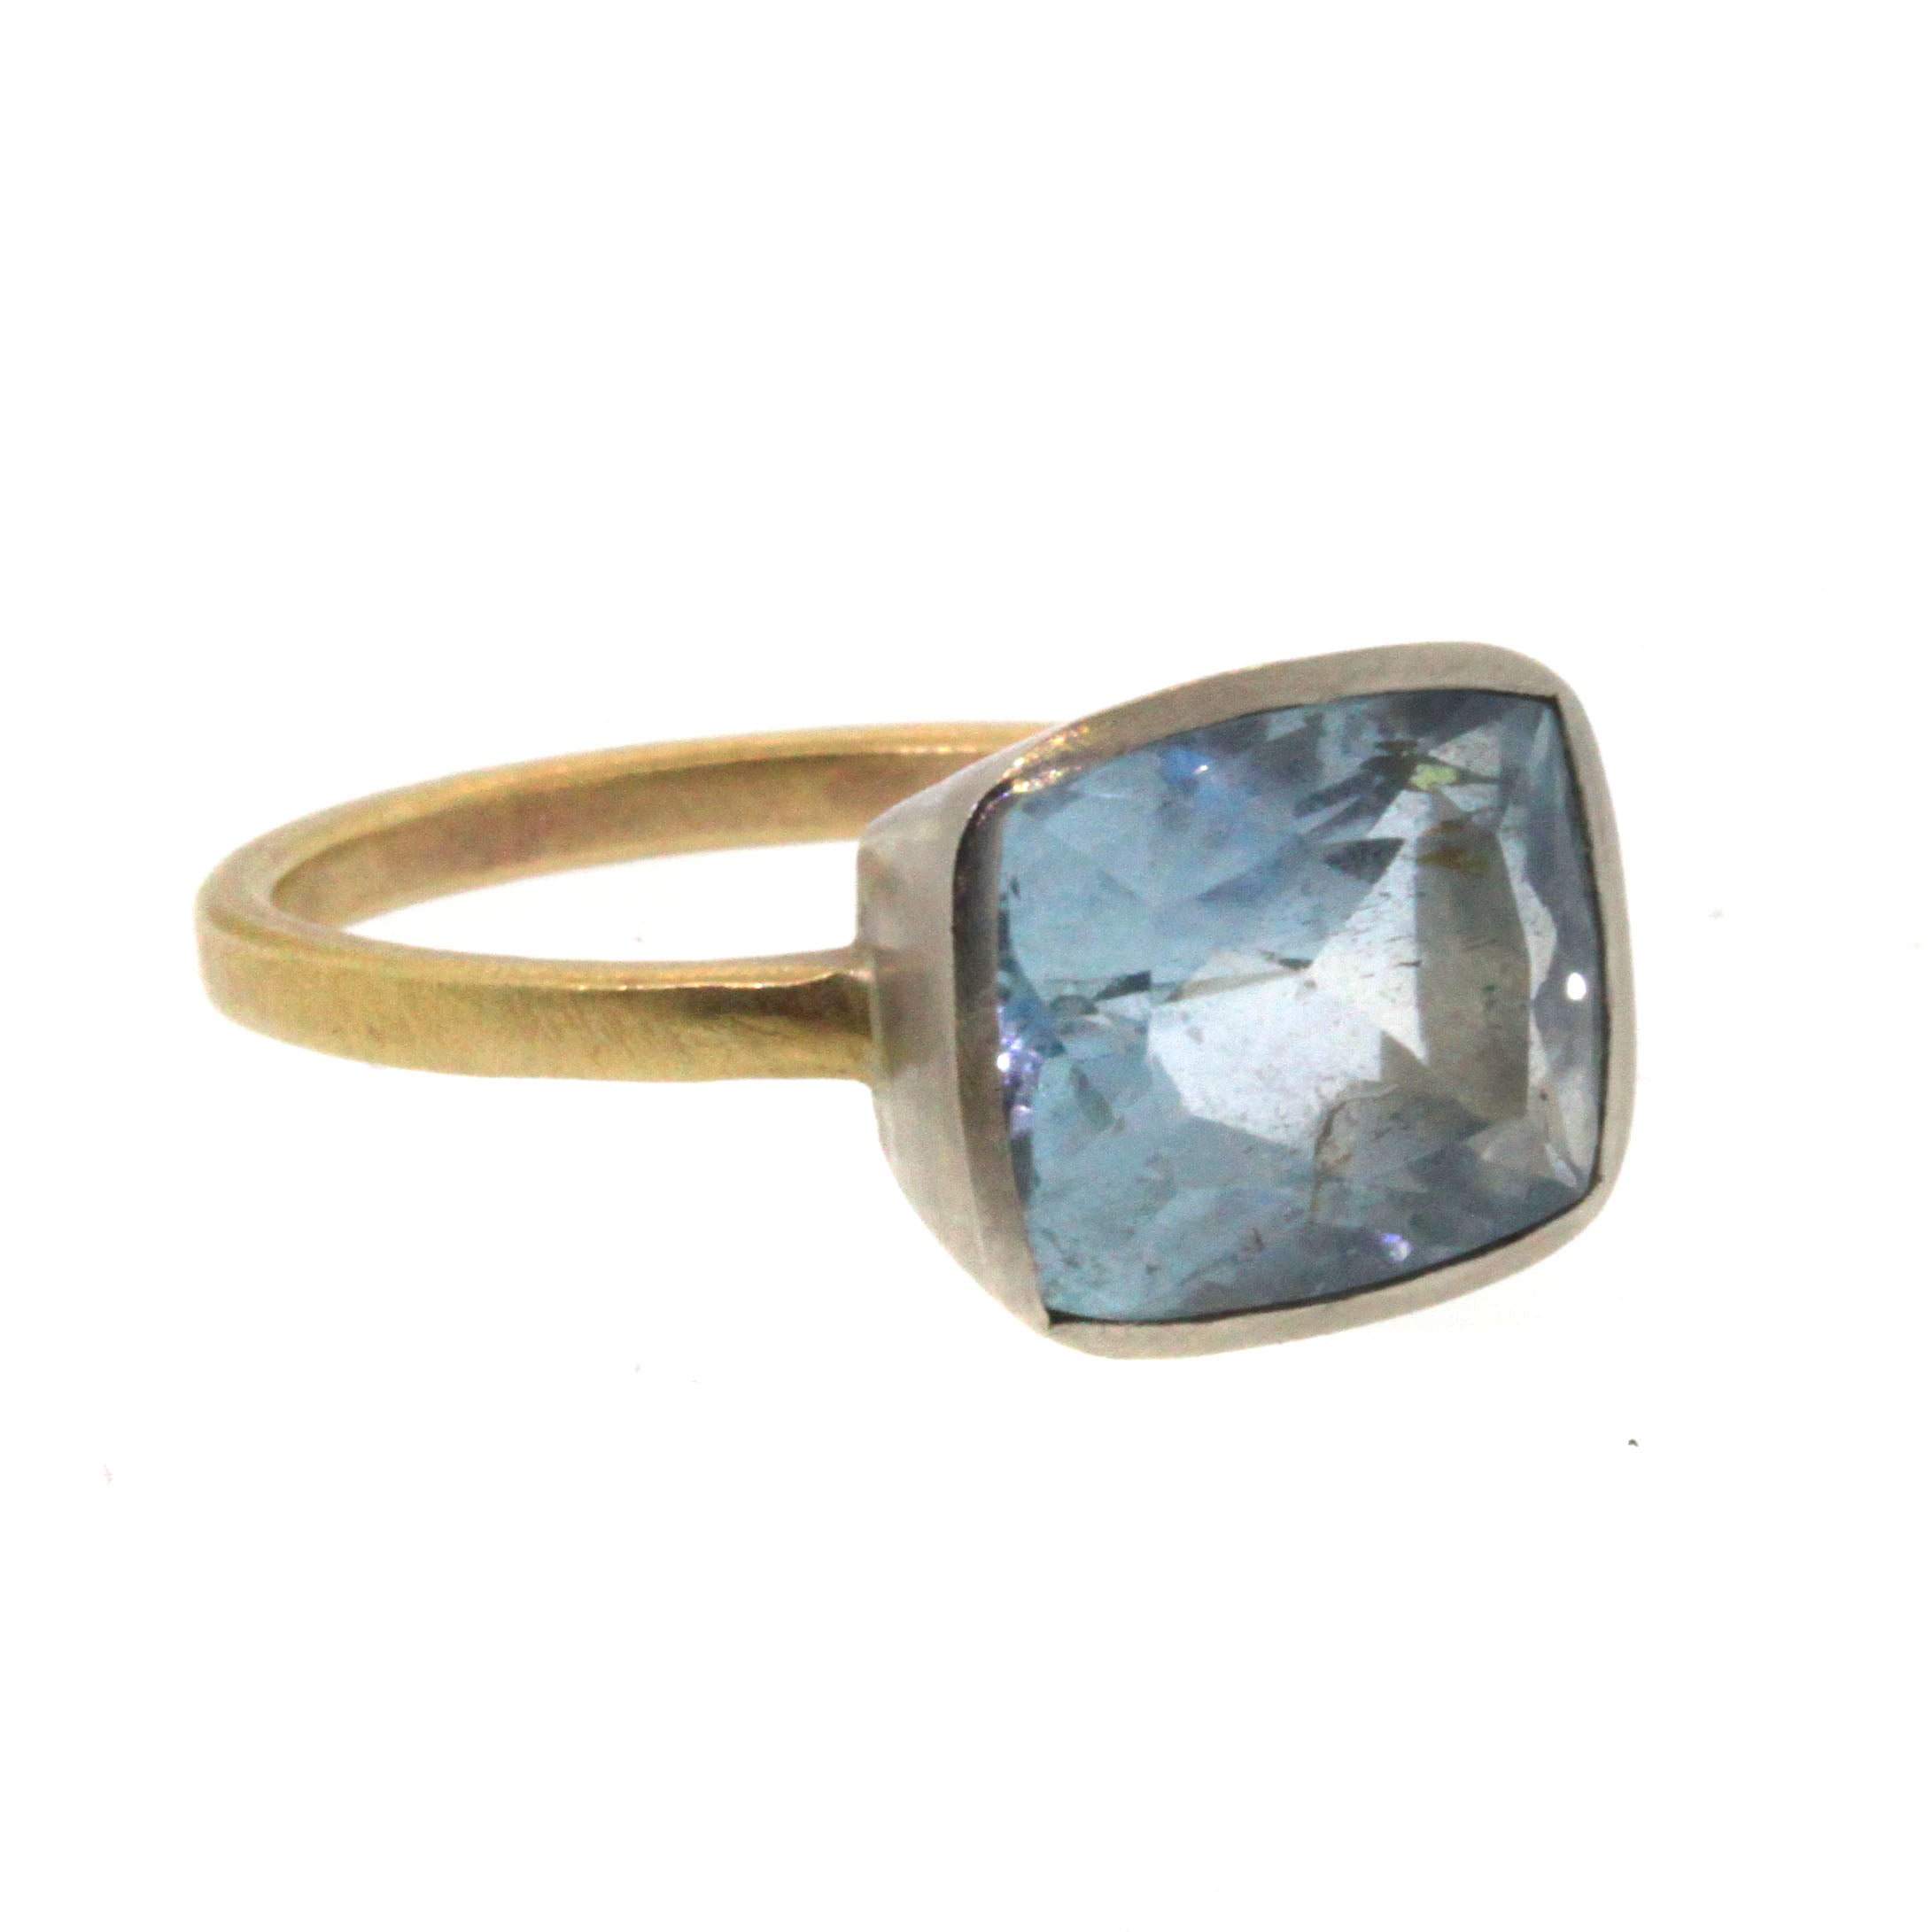 This Cushion Aquamarine Ring was handcrafted by Rebecca Lankford. It features a brilliant, blue aquamarine bezel set in white gold and soldered into a textured yellow gold band. 